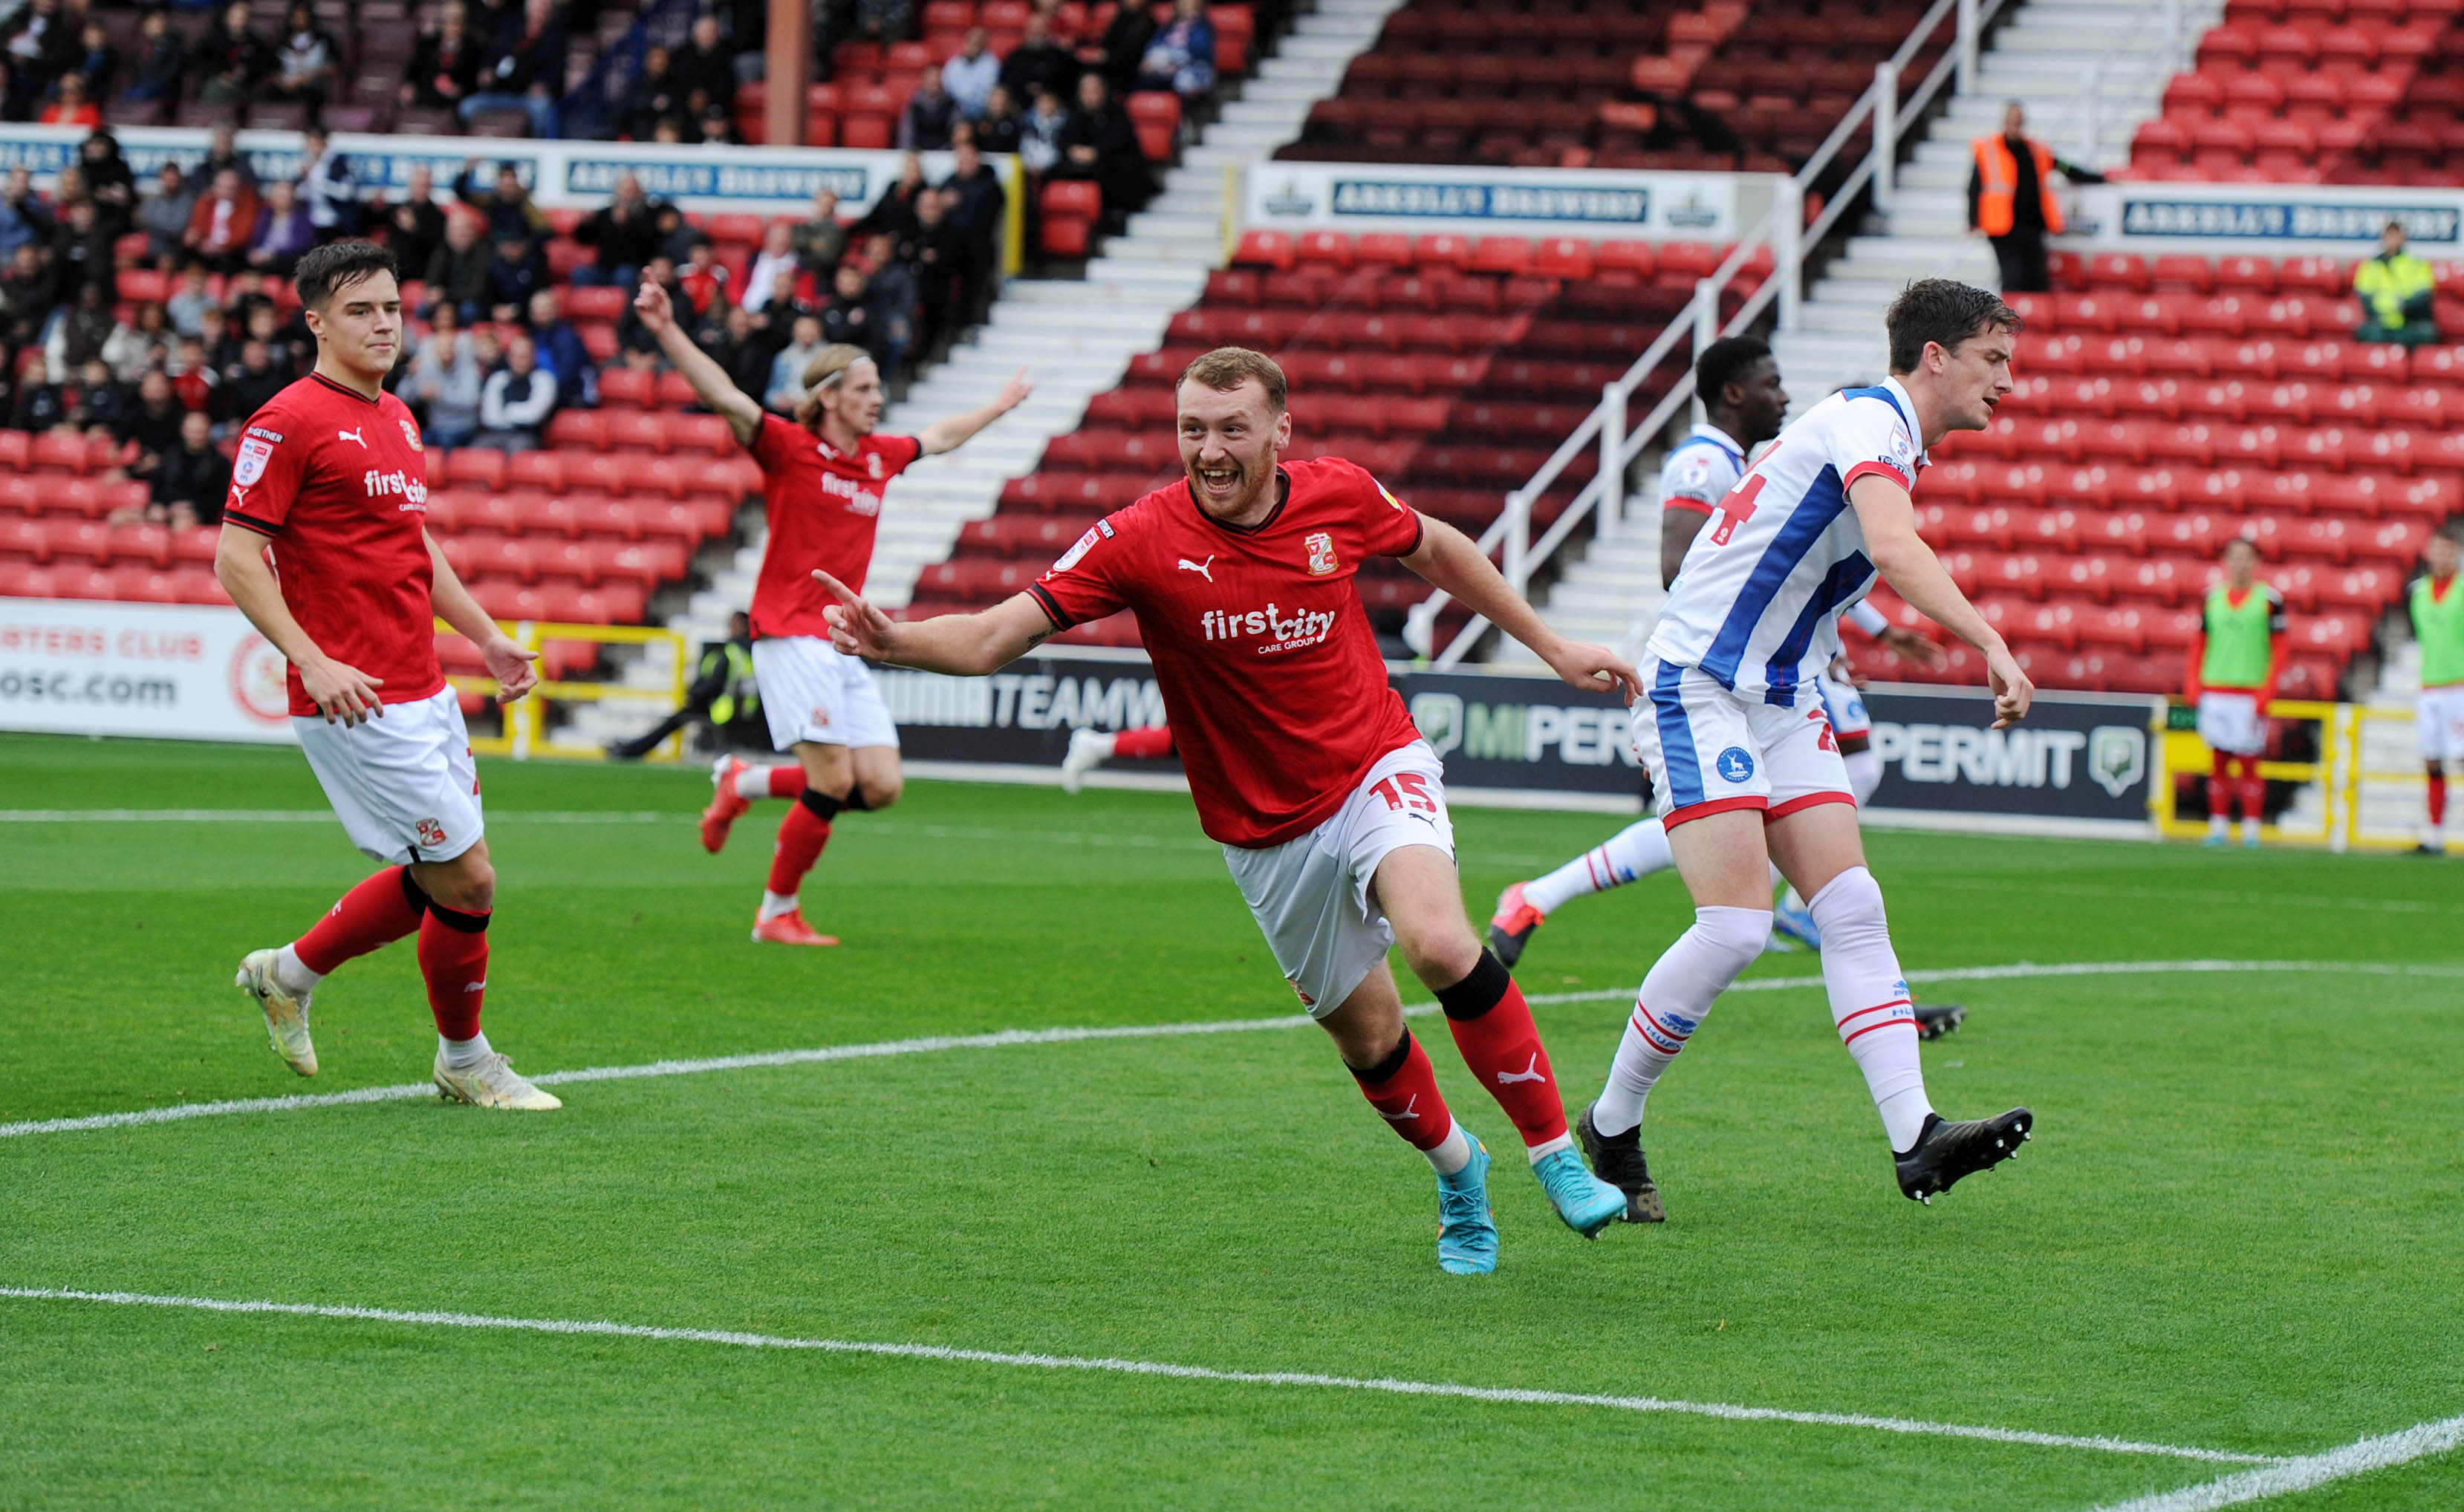 Luke Jephcott says that his future with Swindon and Plymouth is up in the air